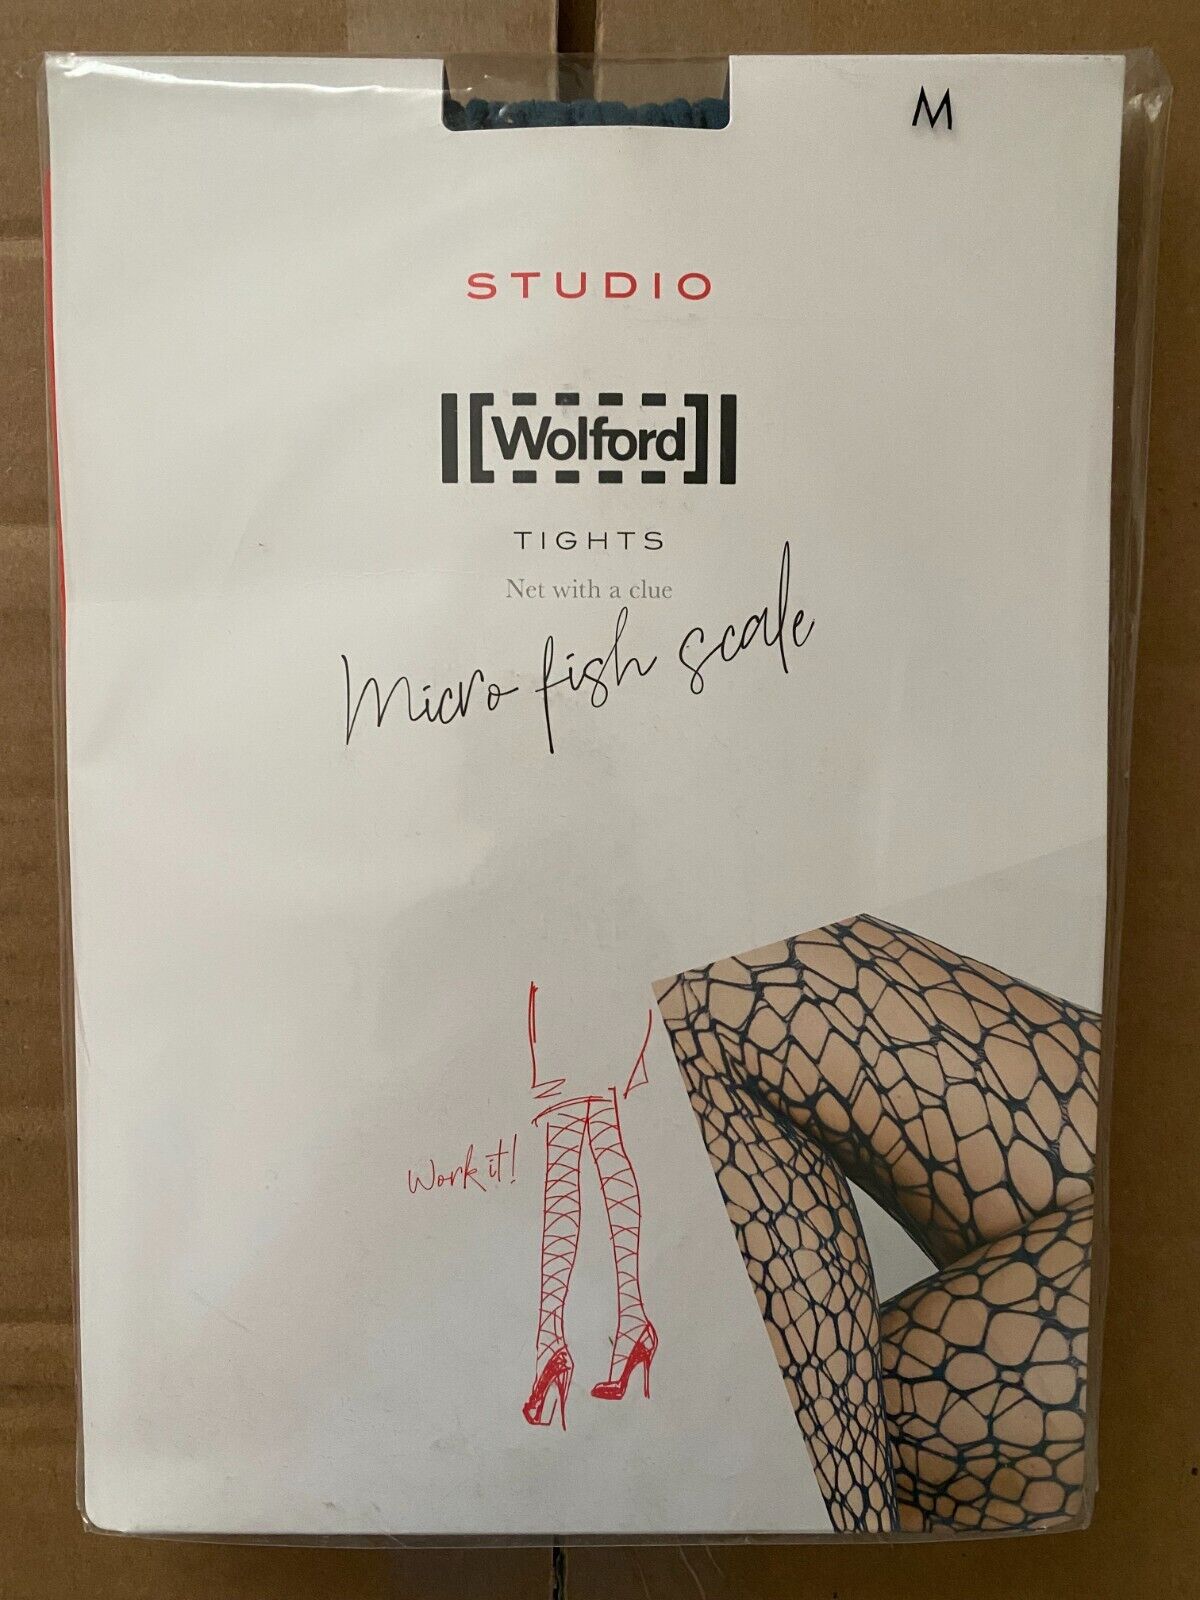 Wolford Micro Fish Scale Tights (Brand New)